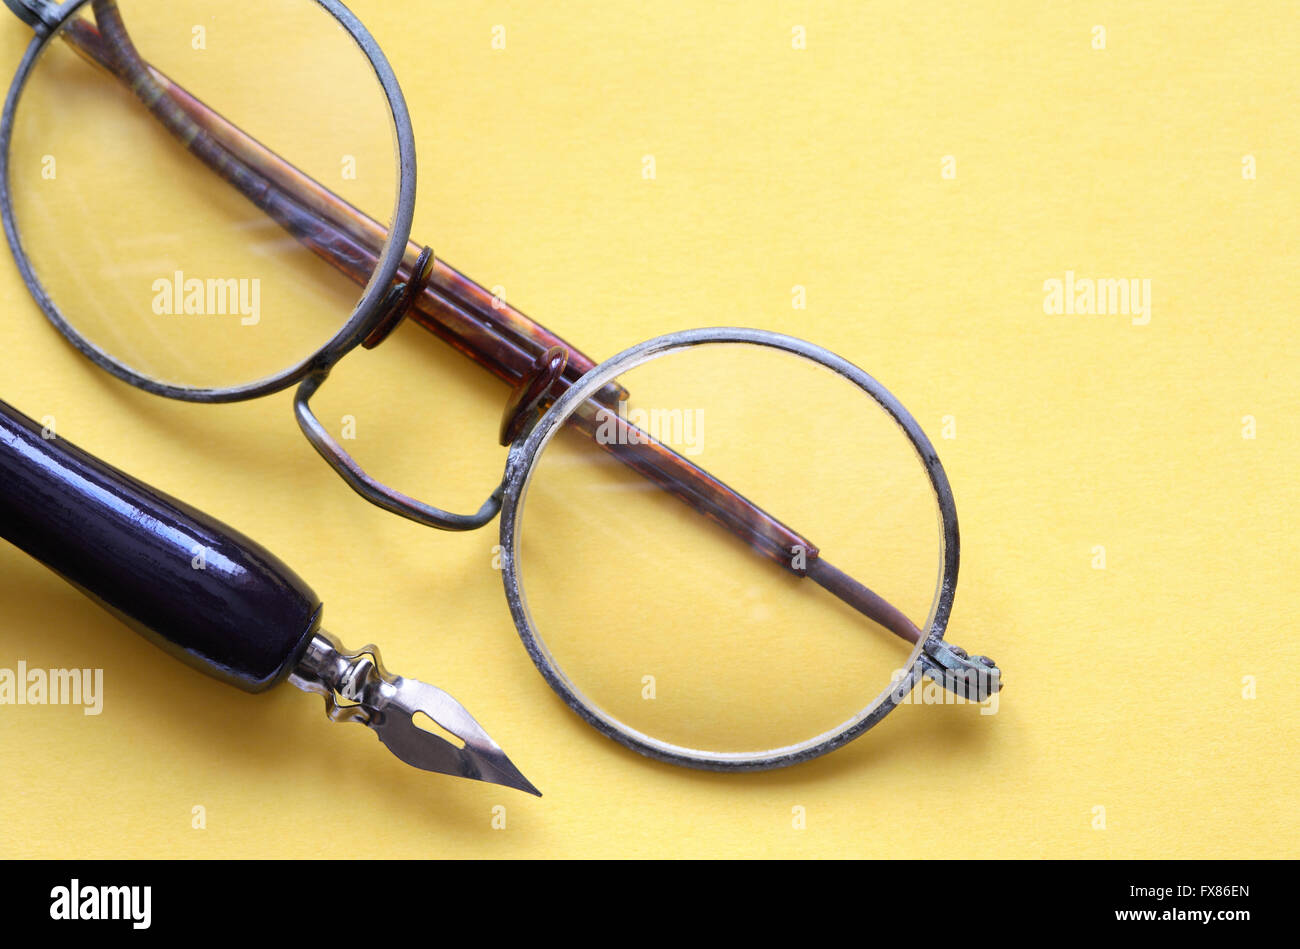 Old vintage spectacles near pen on yellow paper background Stock Photo